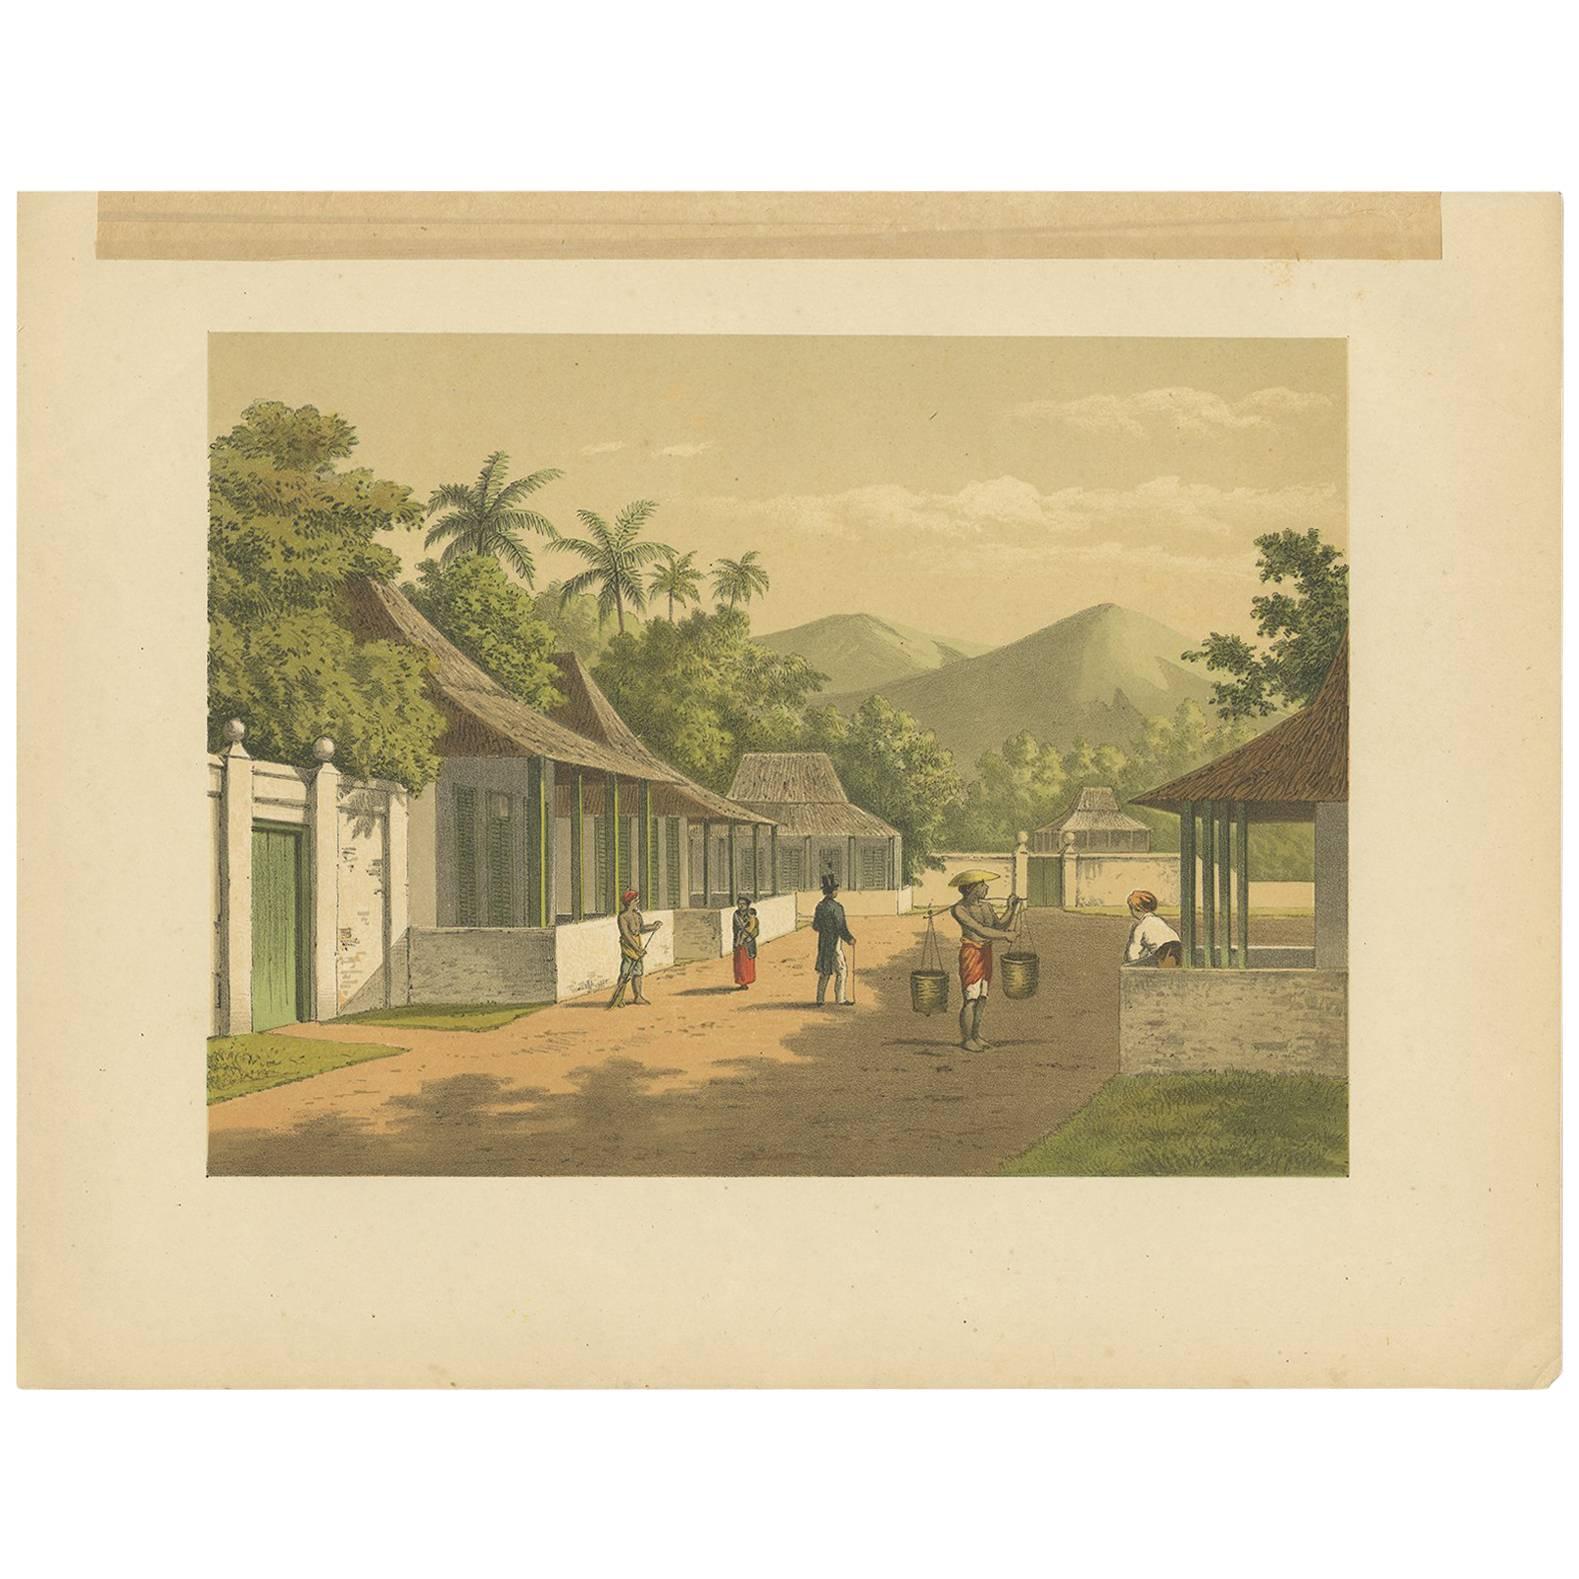 Antique Print with a View of Batu Gajah by M.T.H. Perelaer, 1888